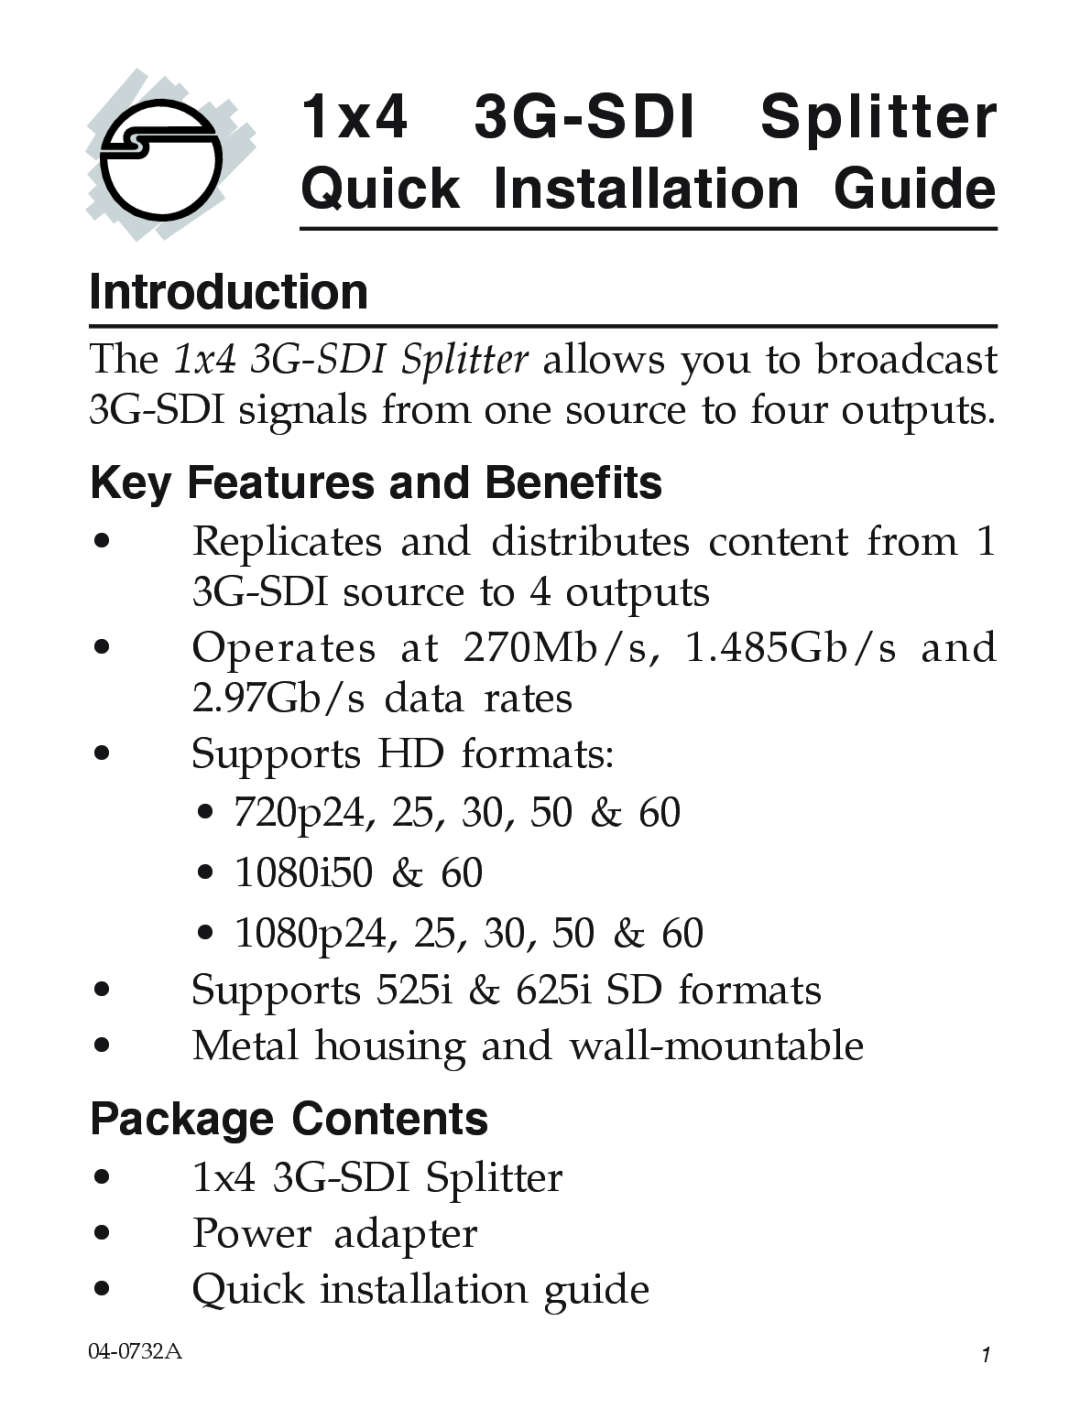 SIIG 104-0732A manual Introduction, Key Features and Benefits, Package Contents, 1x4 3G-SDISplitter 